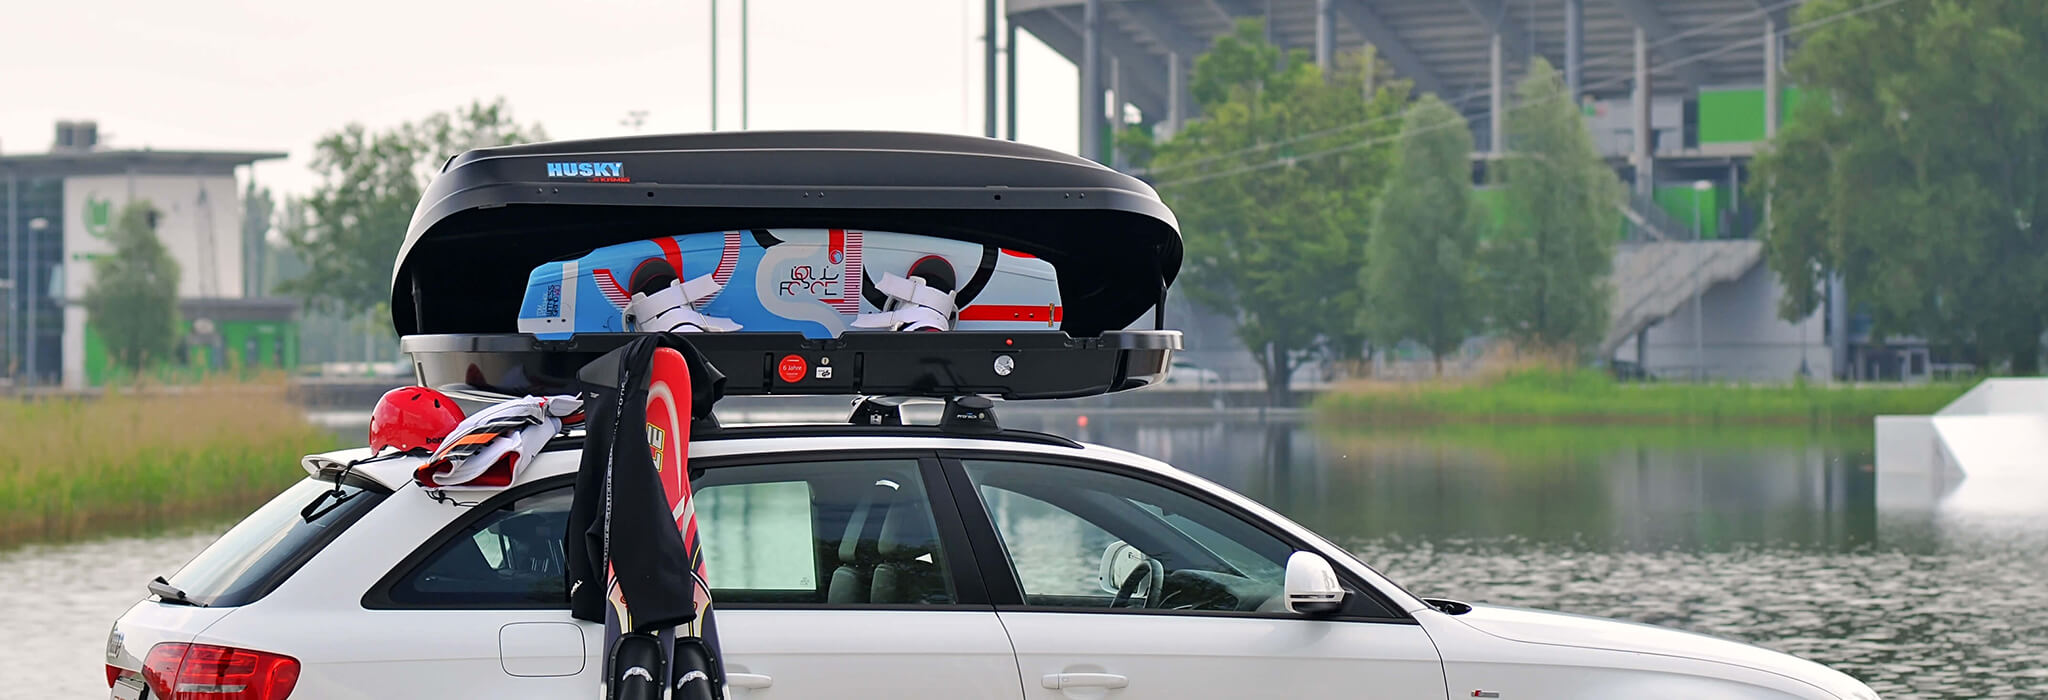 Kamei Husky Roof Box carrying wake boards and water skis